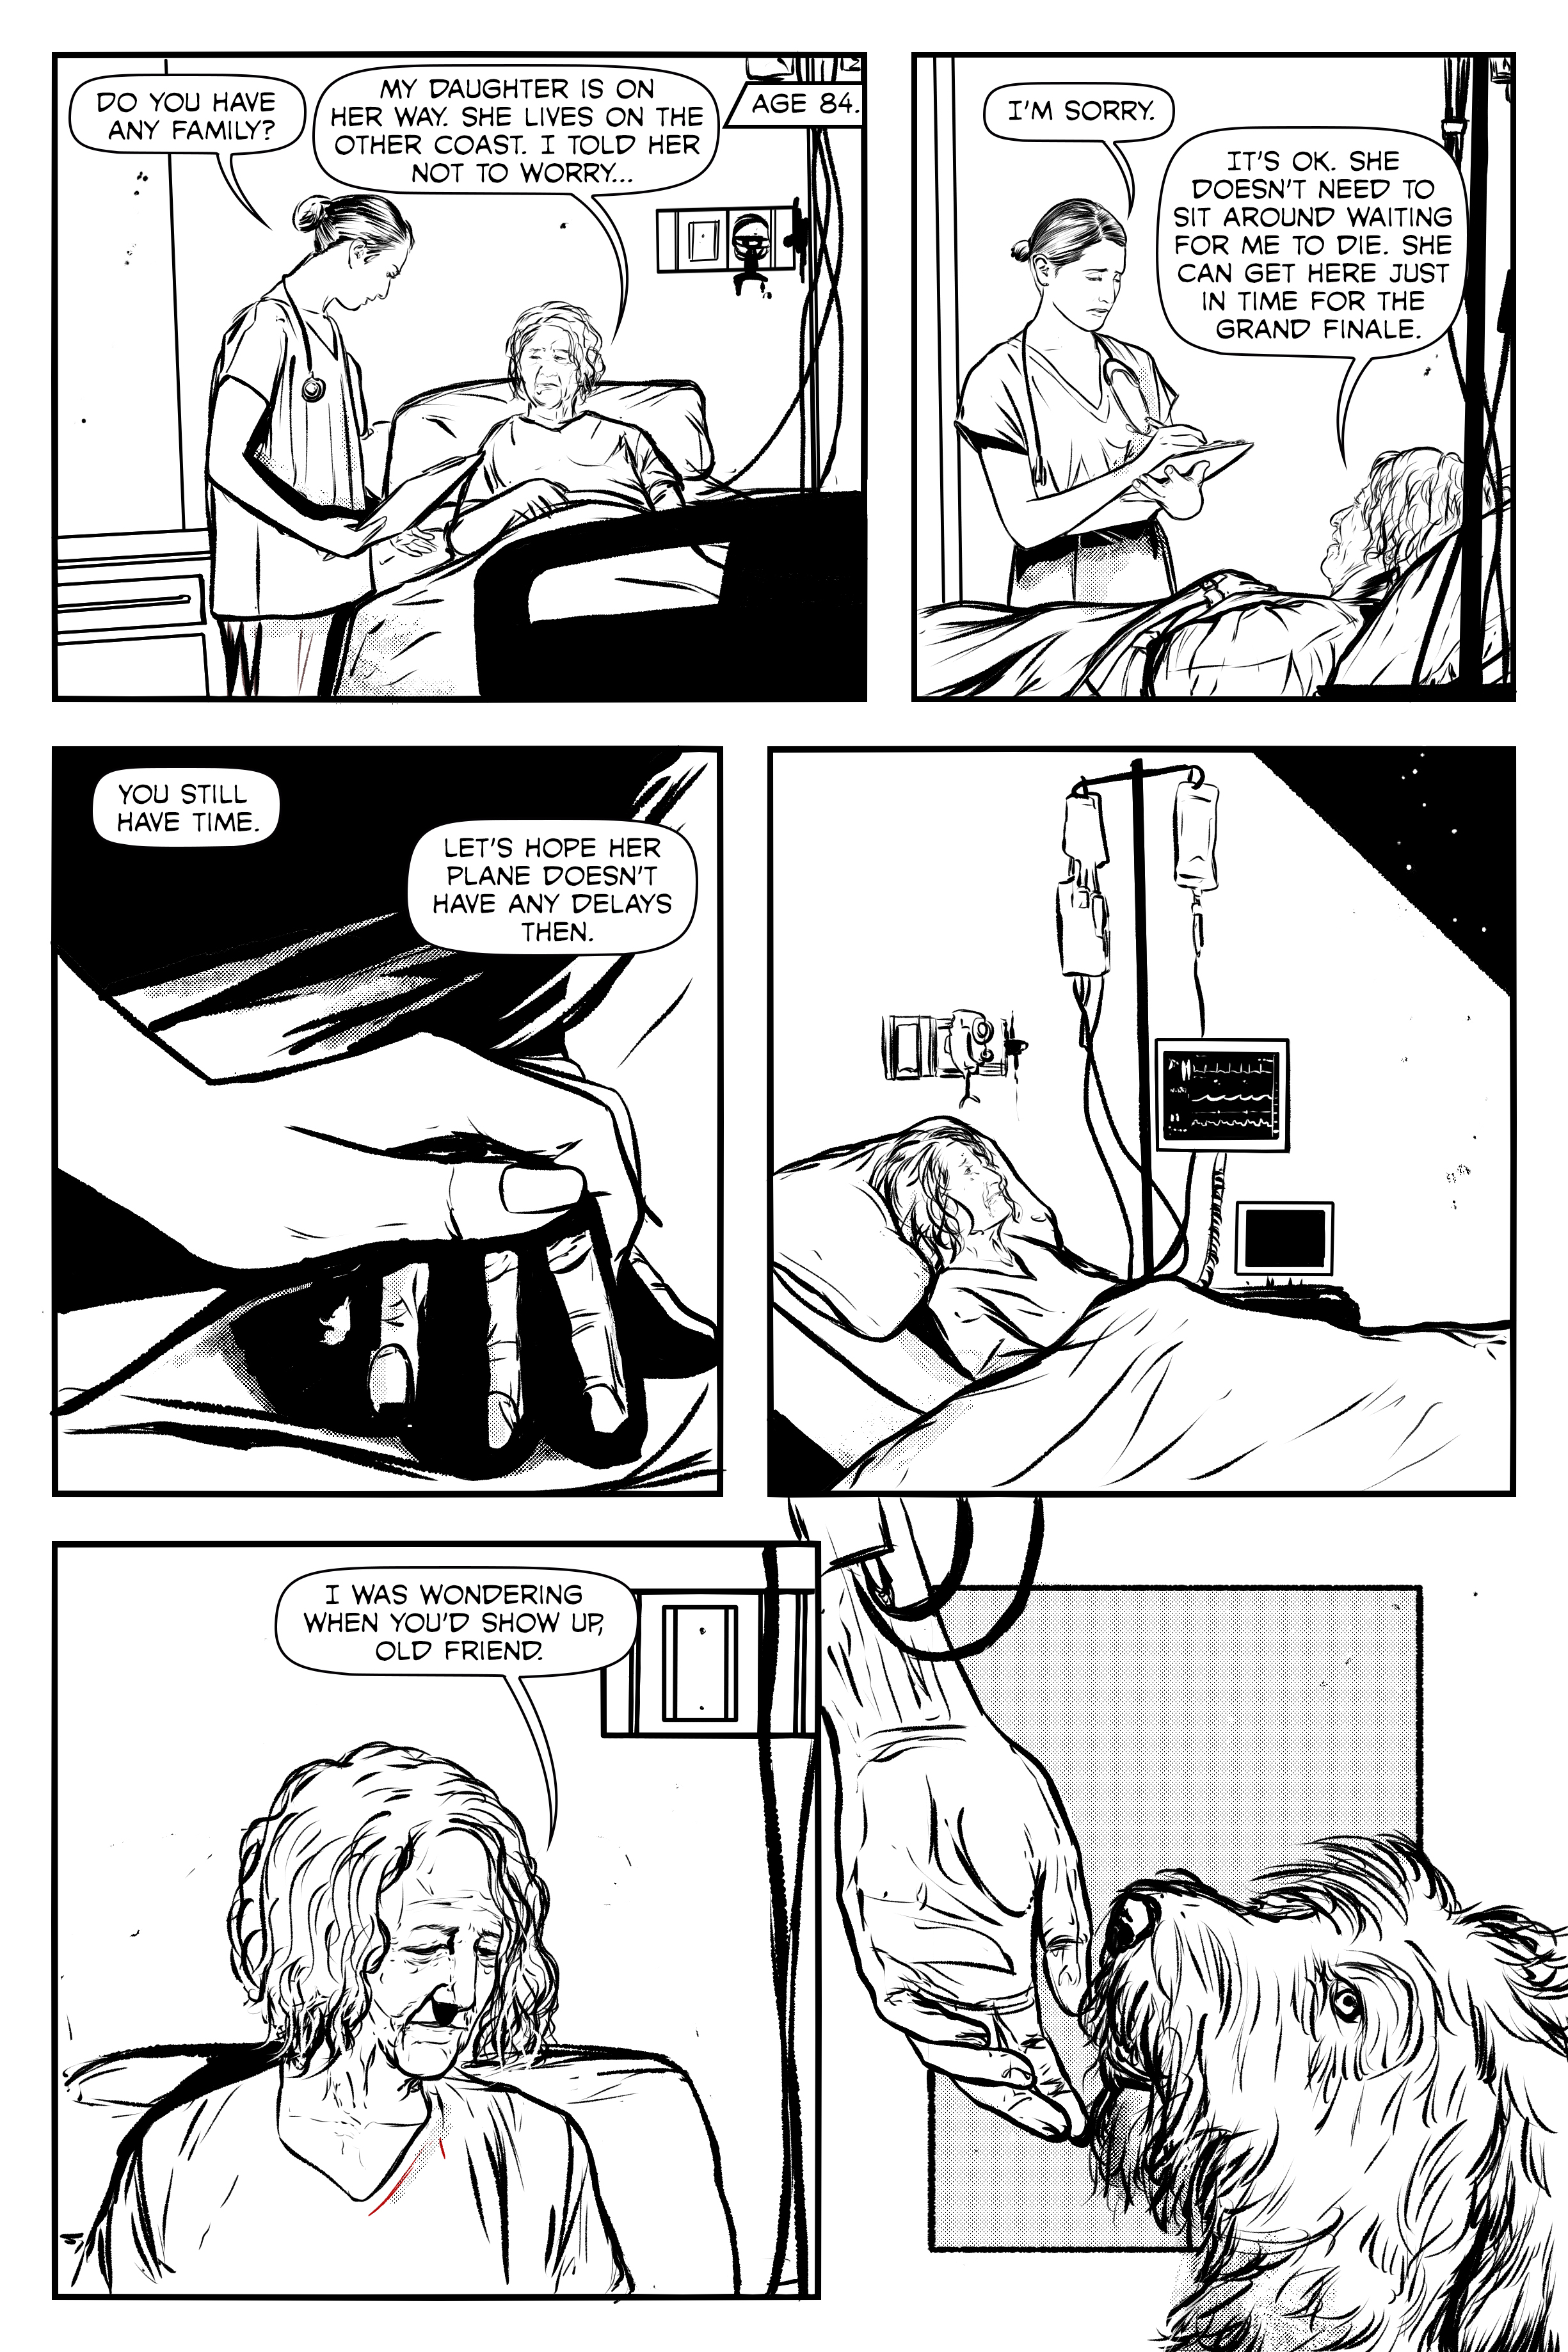 Preview Page 5